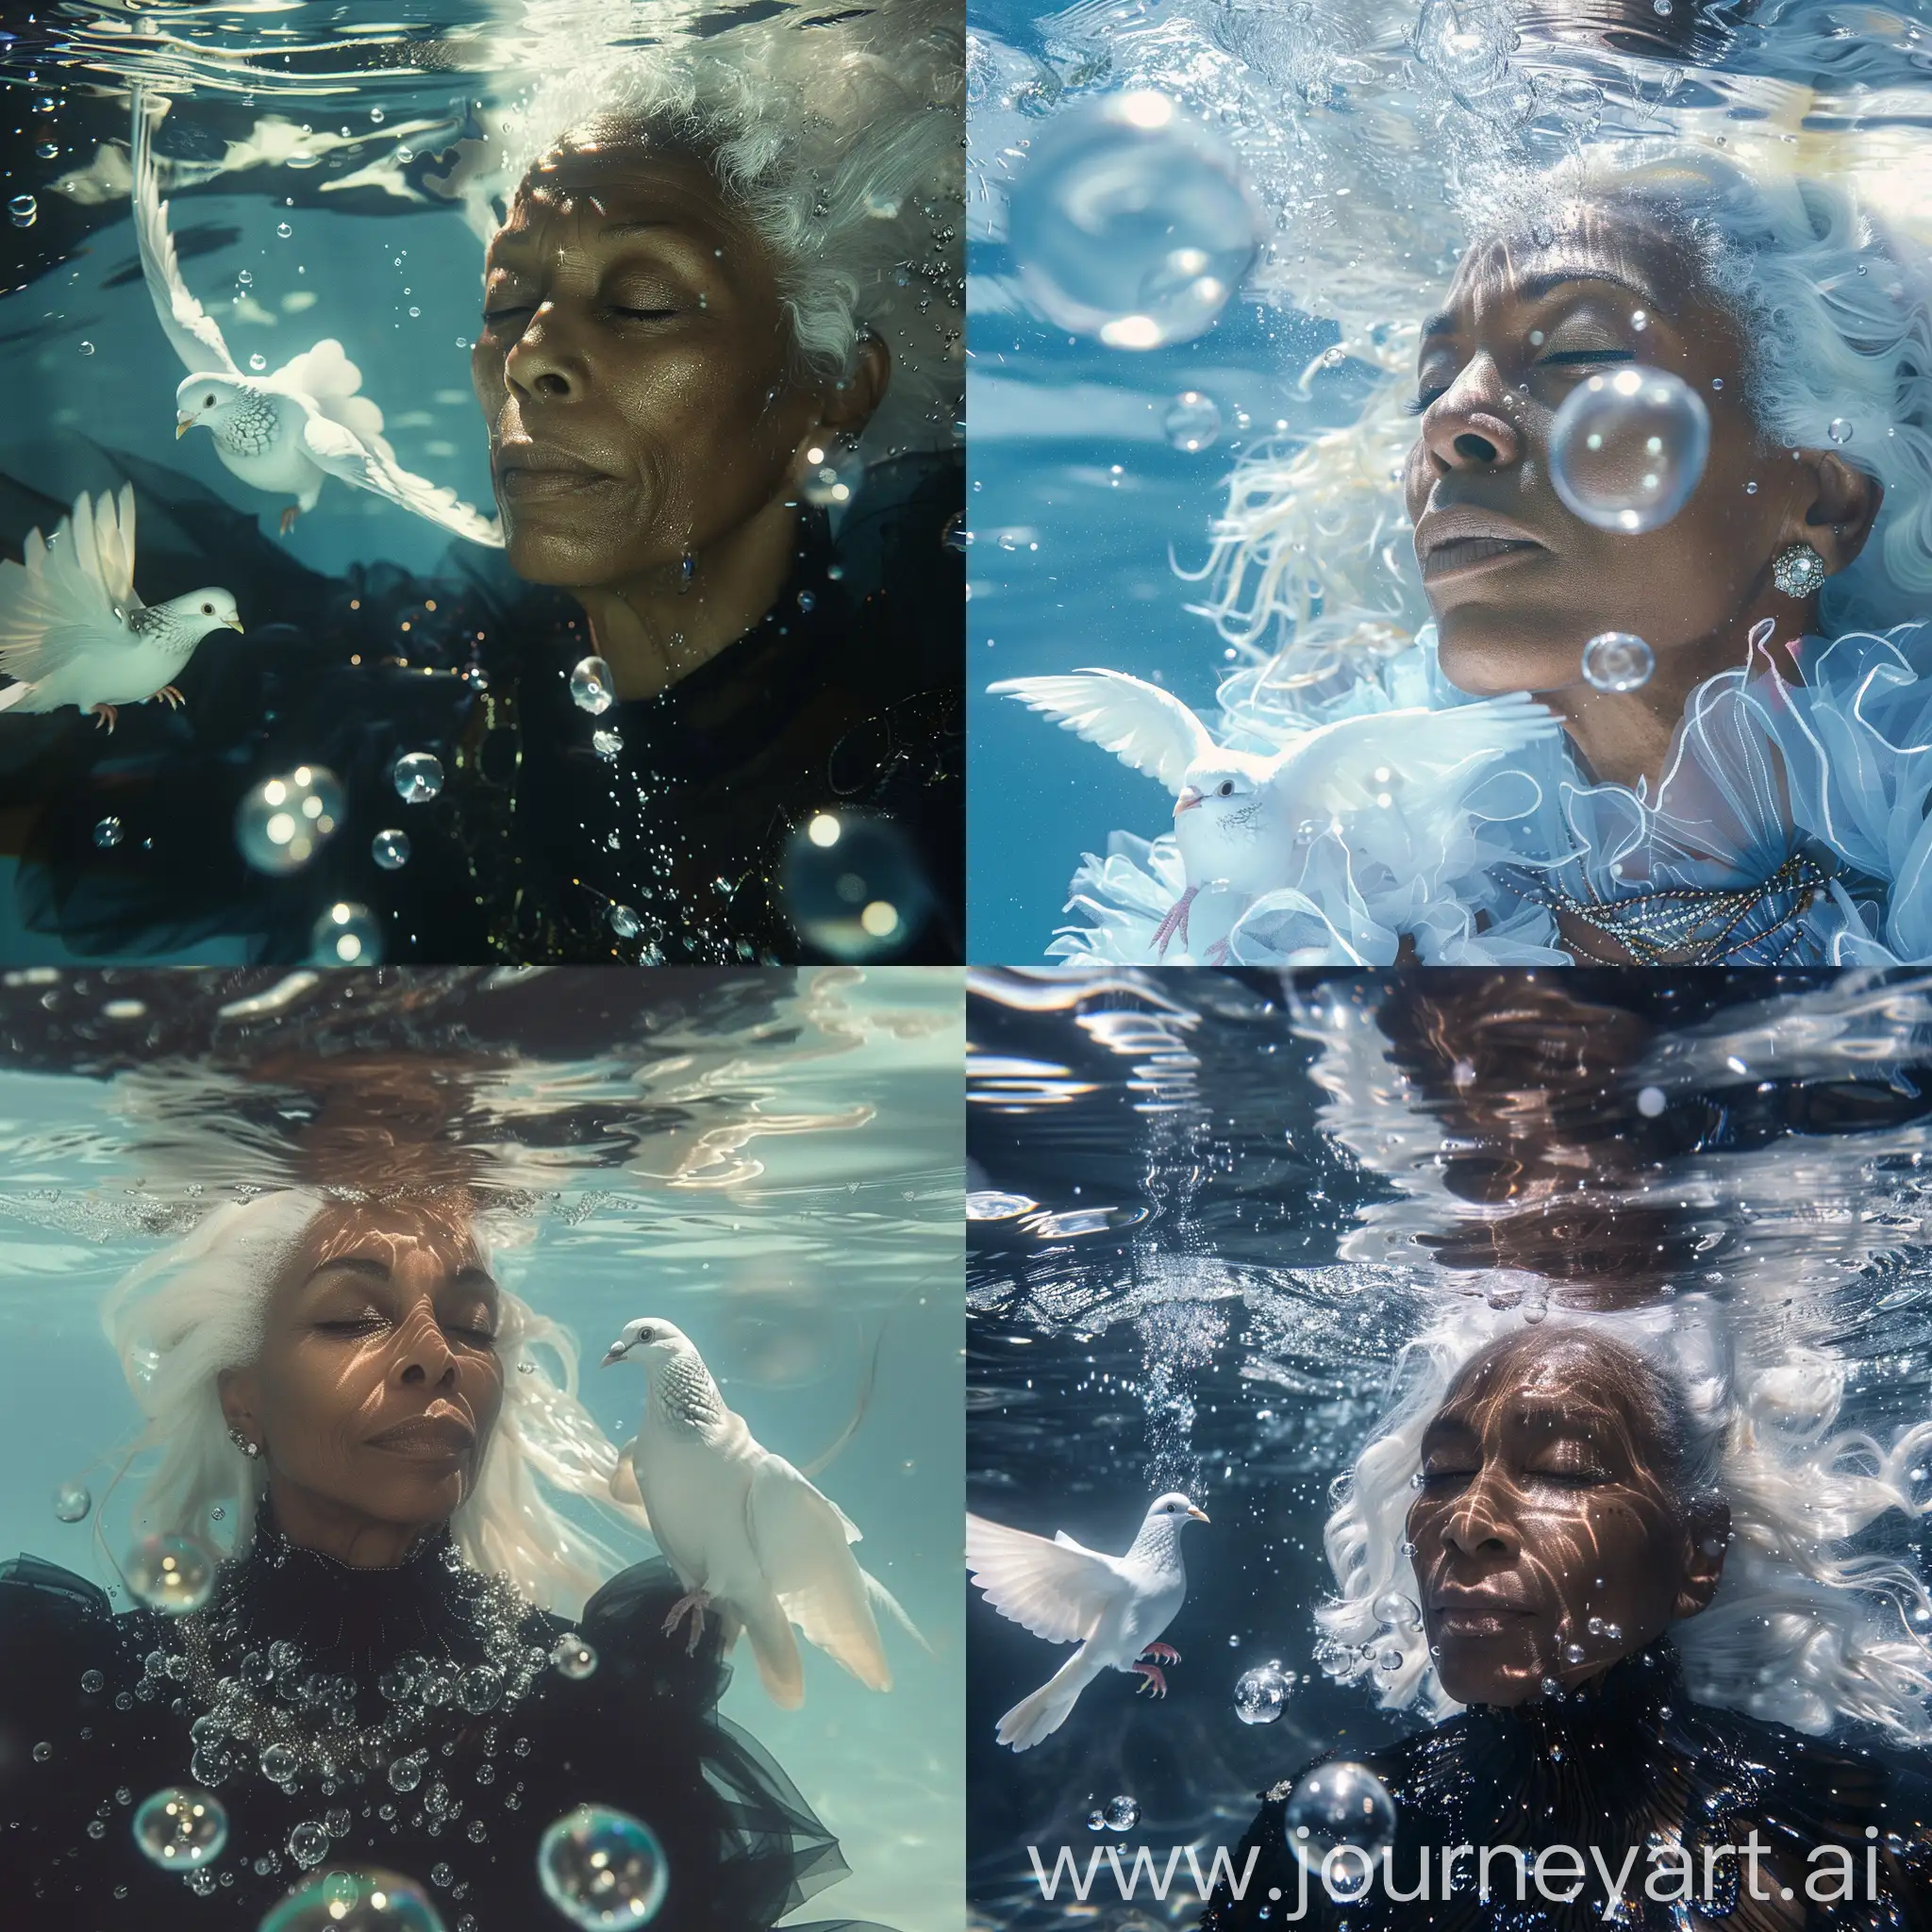 Serene-Elegance-Tranquil-Black-Woman-with-White-Hair-Submerged-Accompanied-by-an-Underwater-Dove